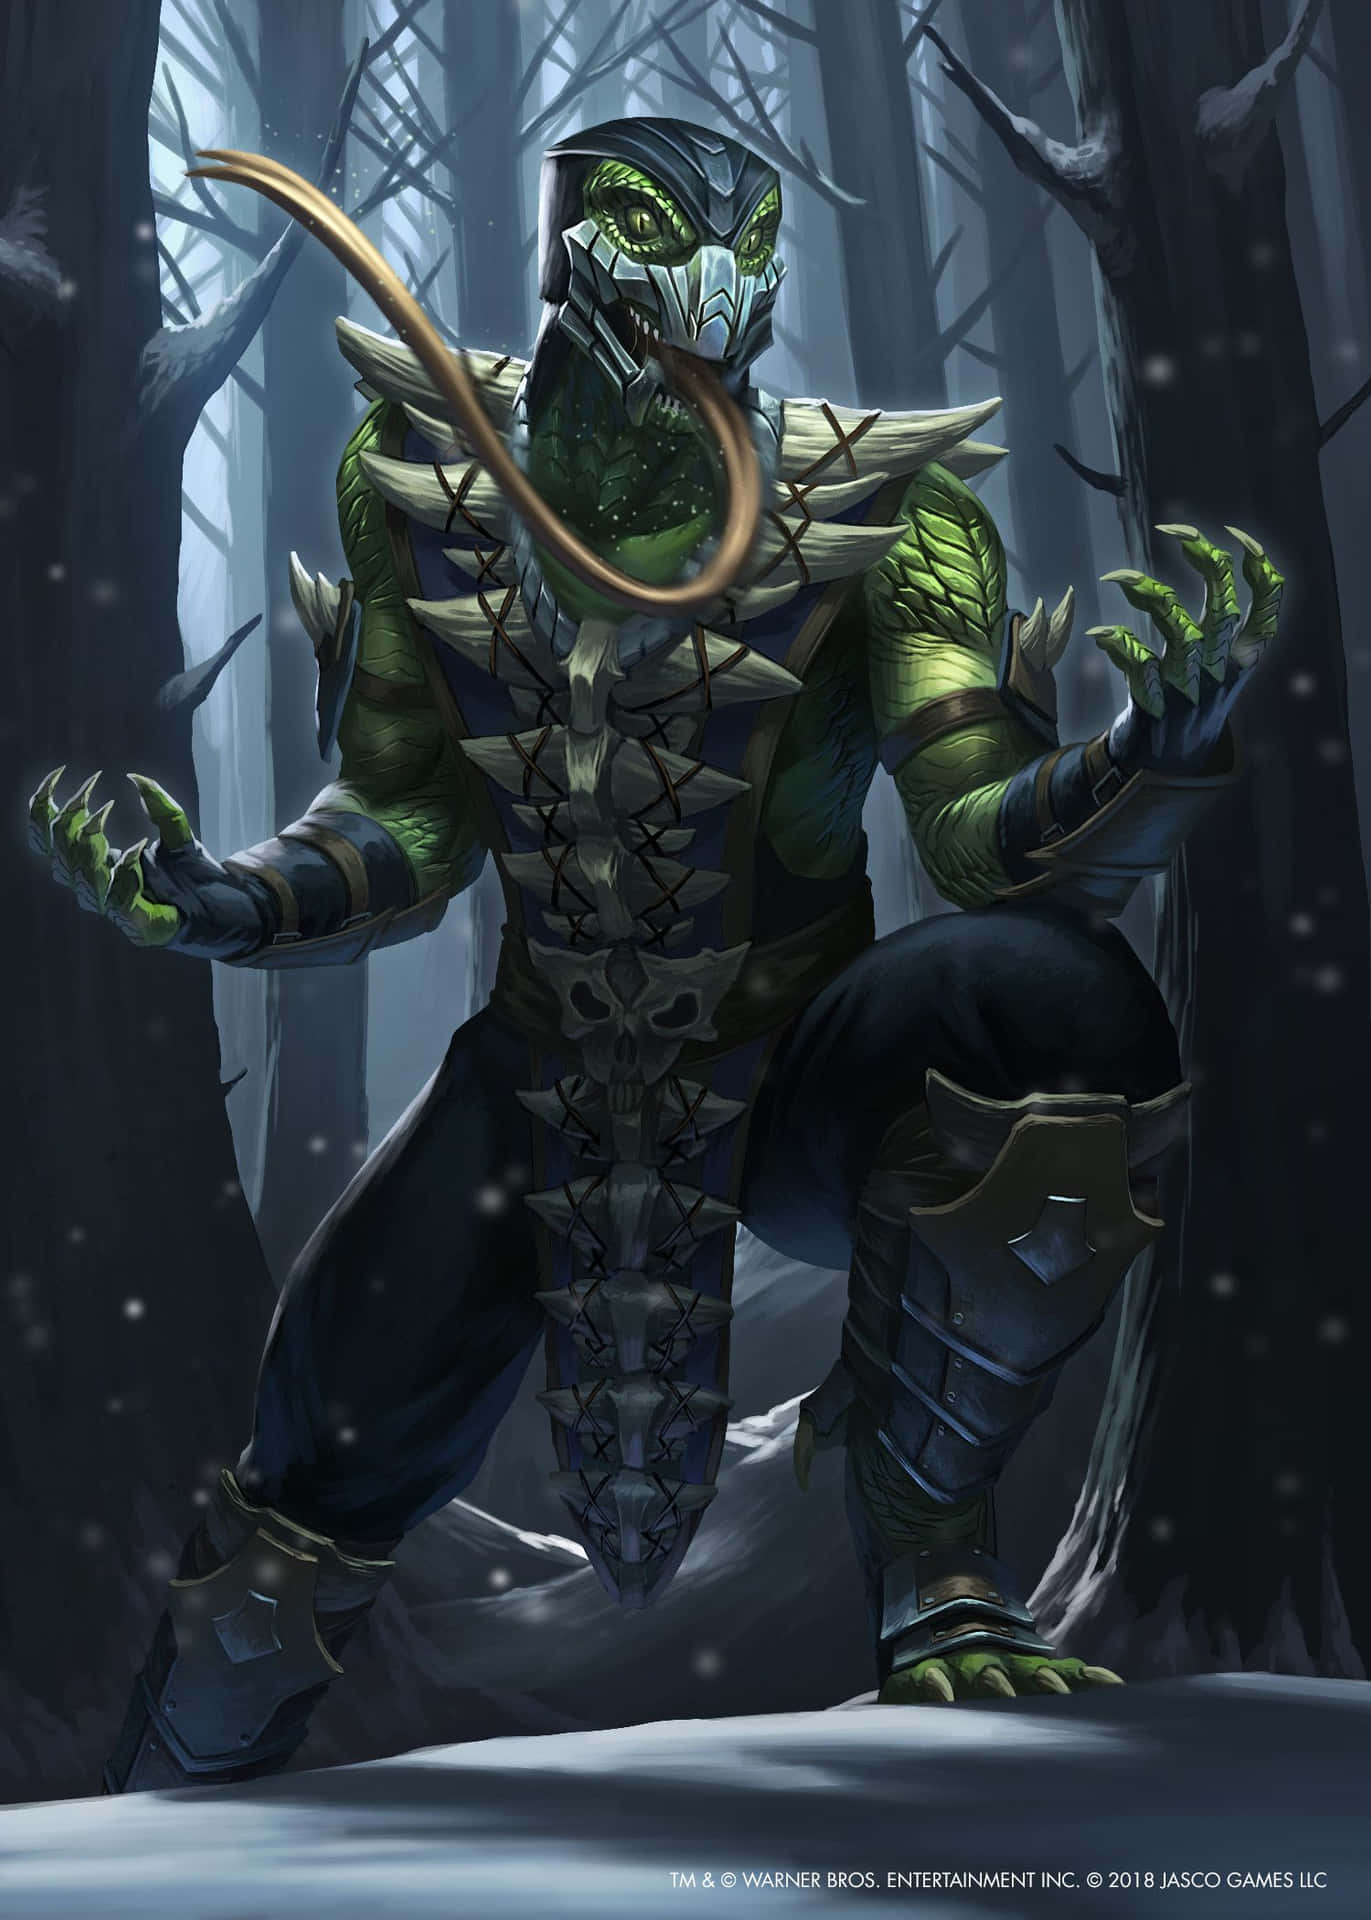 Reptile, the Deadly Assassin from Mortal Kombat Wallpaper